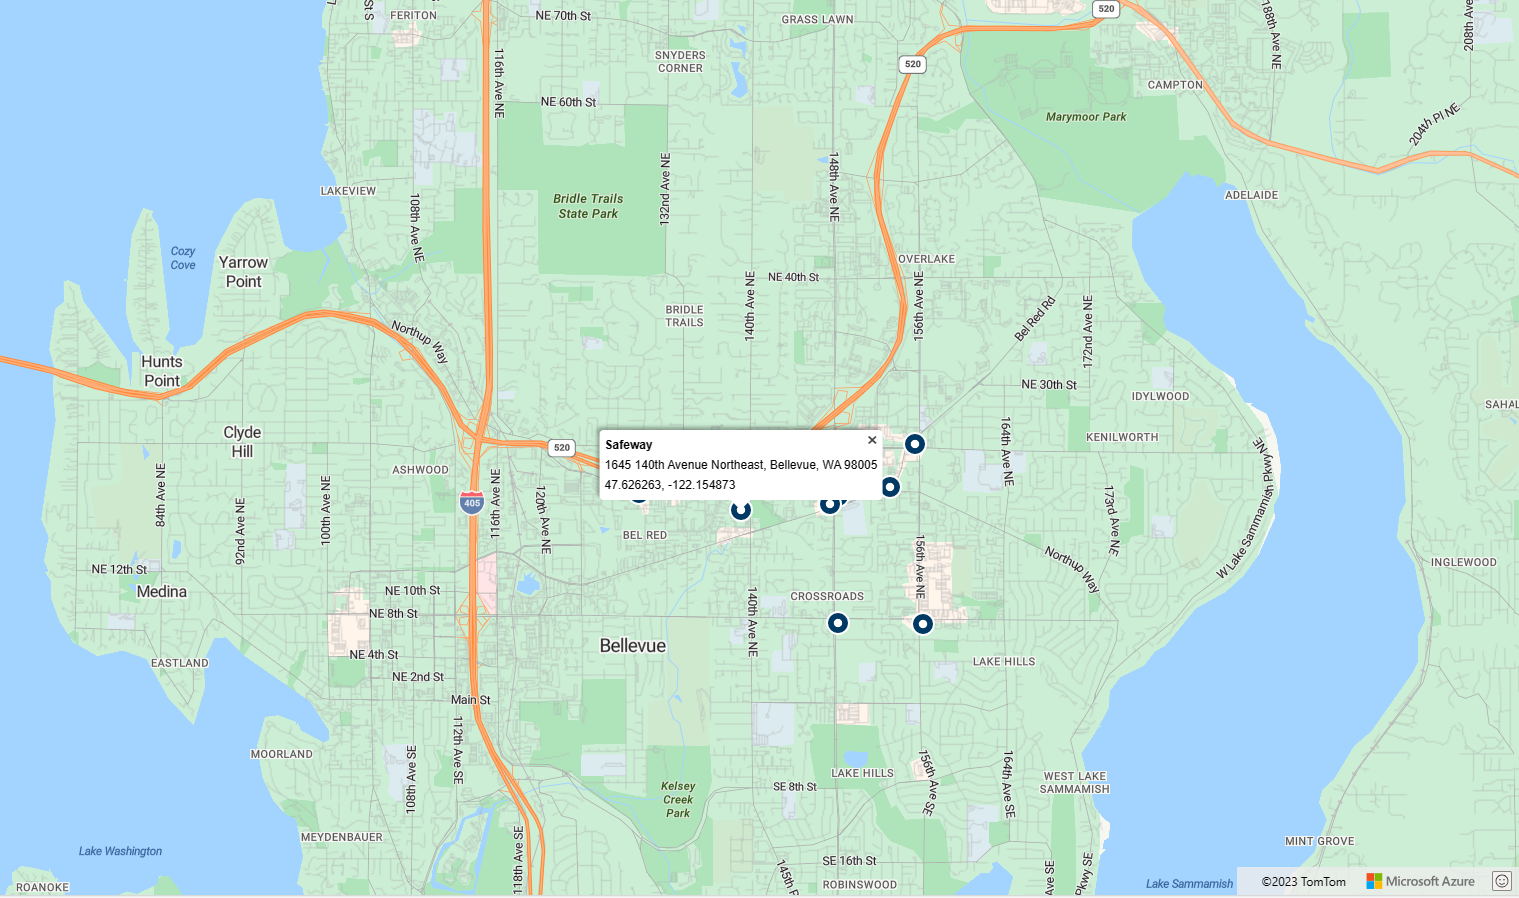 A screenshot of a map with information popups that appear when you hover over a search pin.